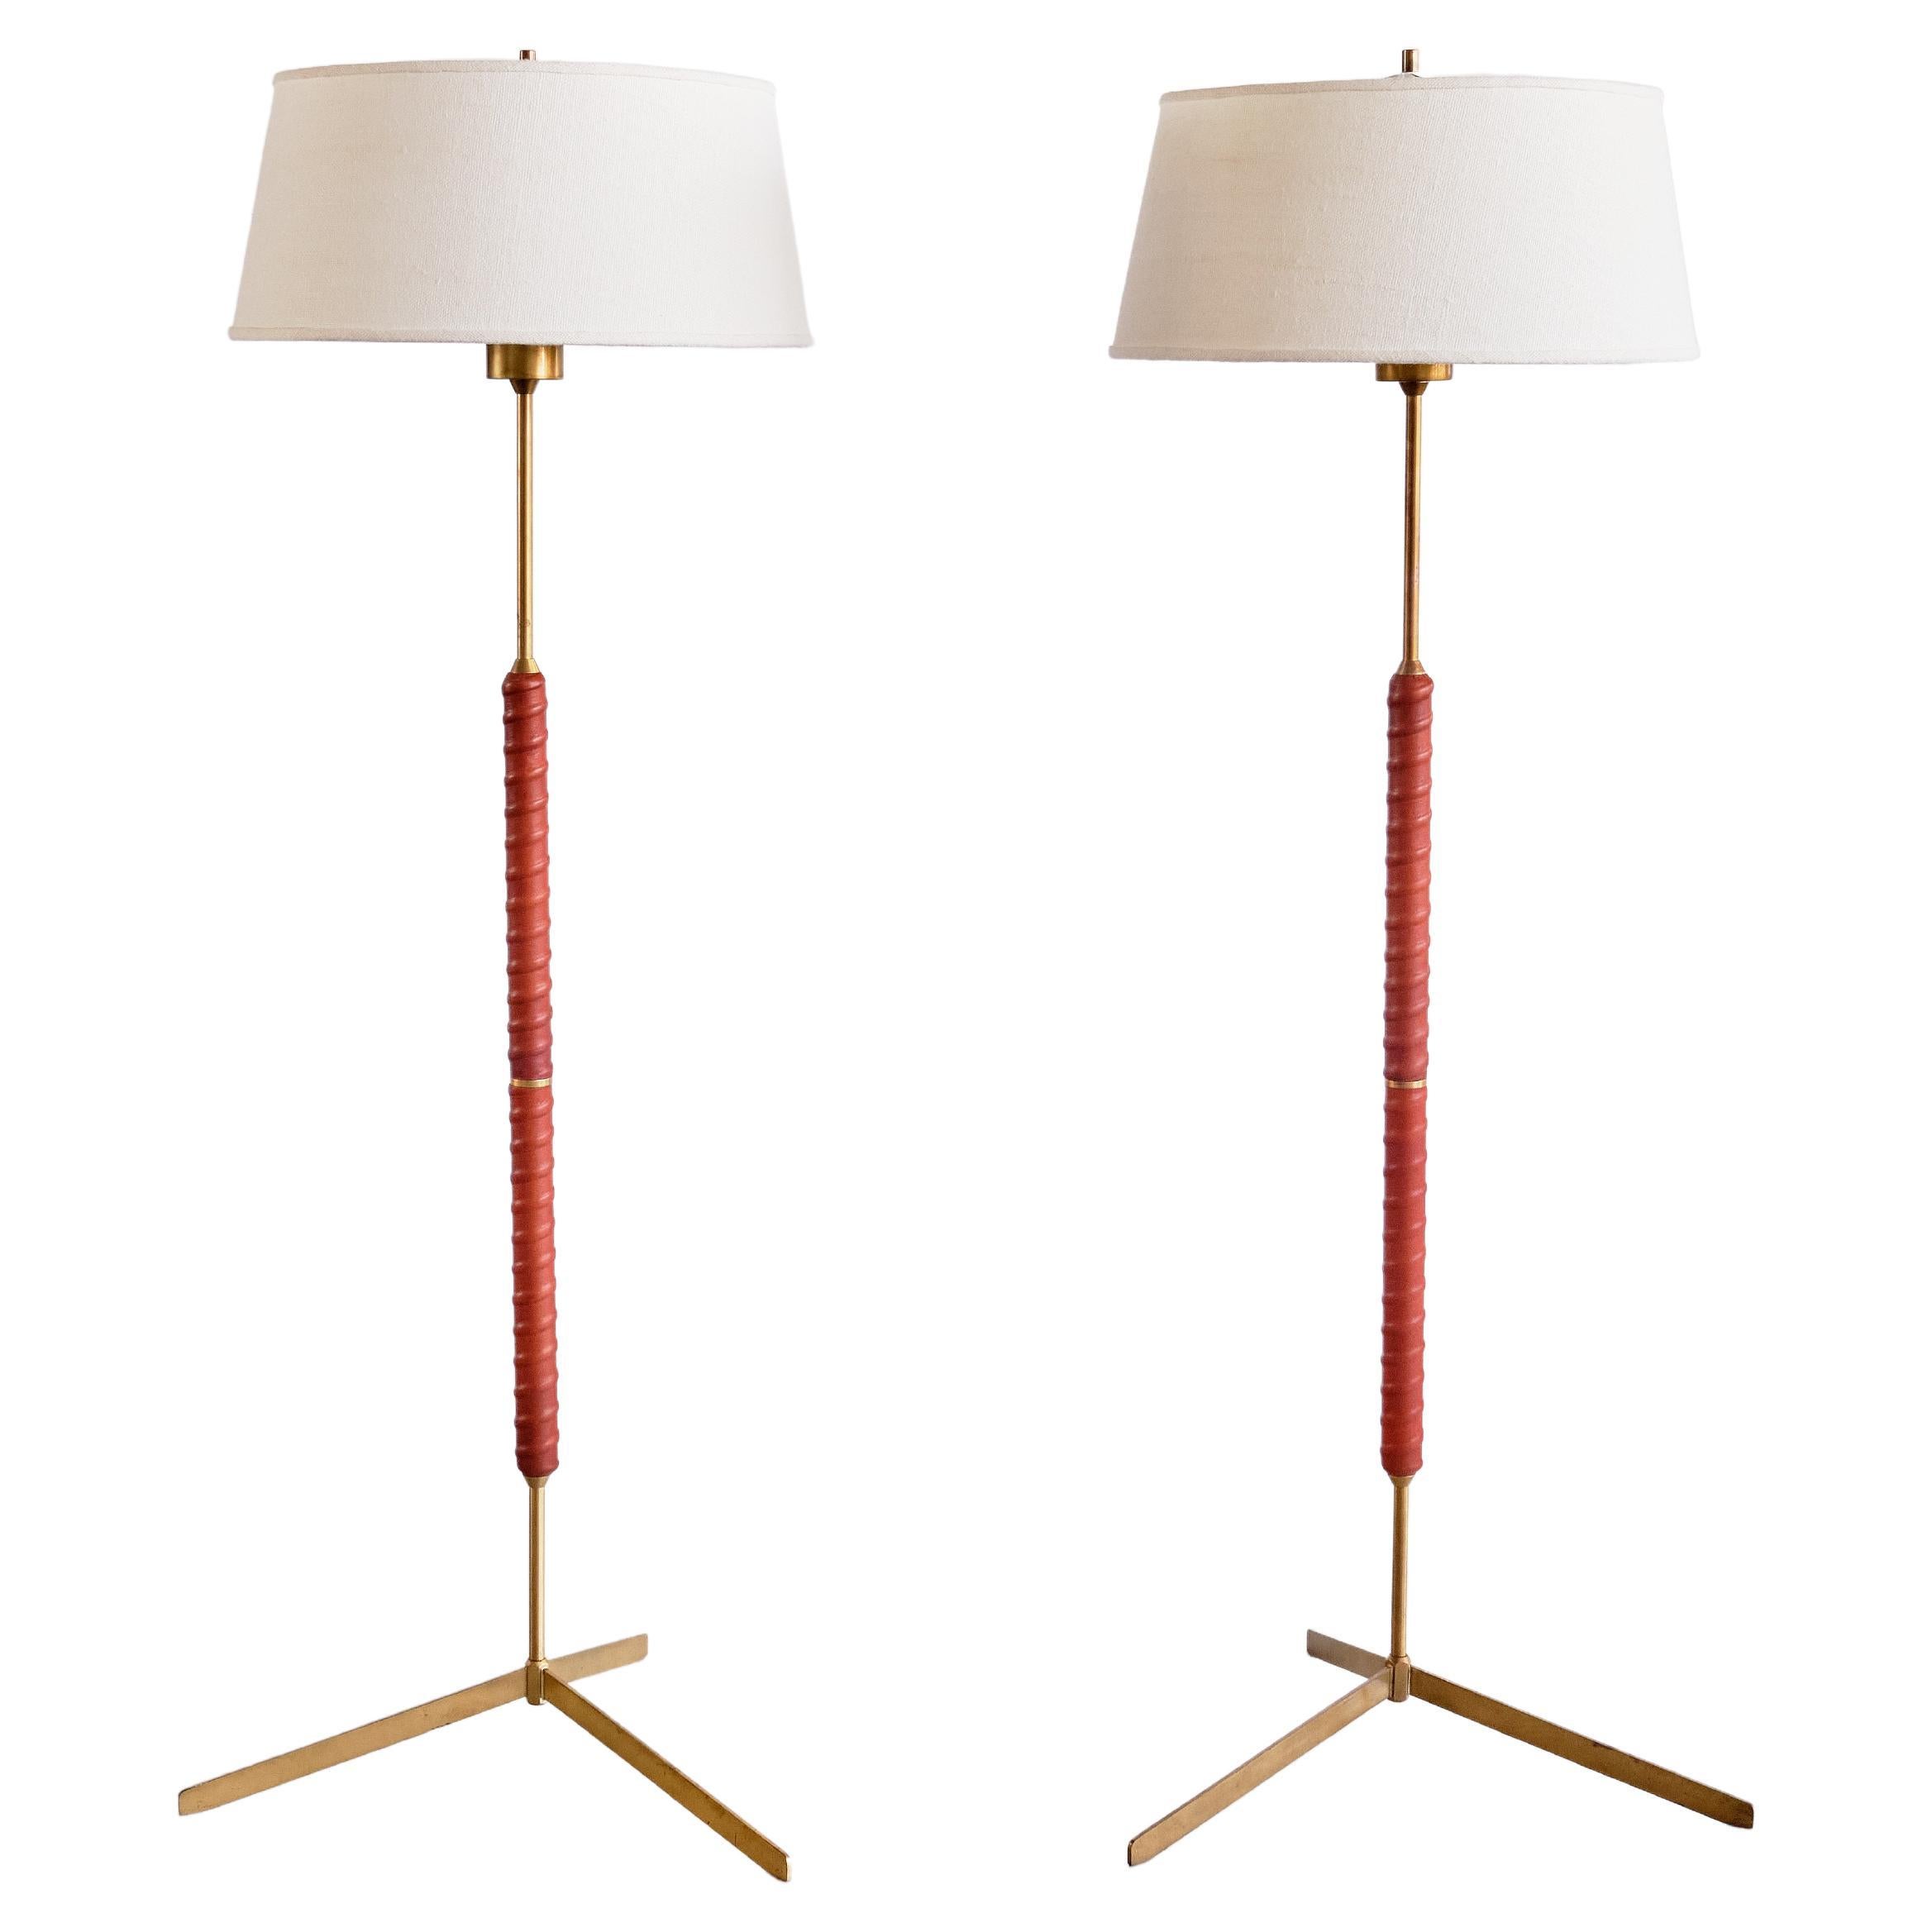 Pair of Bergboms G-31 Floor Lamps in Brass, Leather and Linen, Sweden, 1940s For Sale